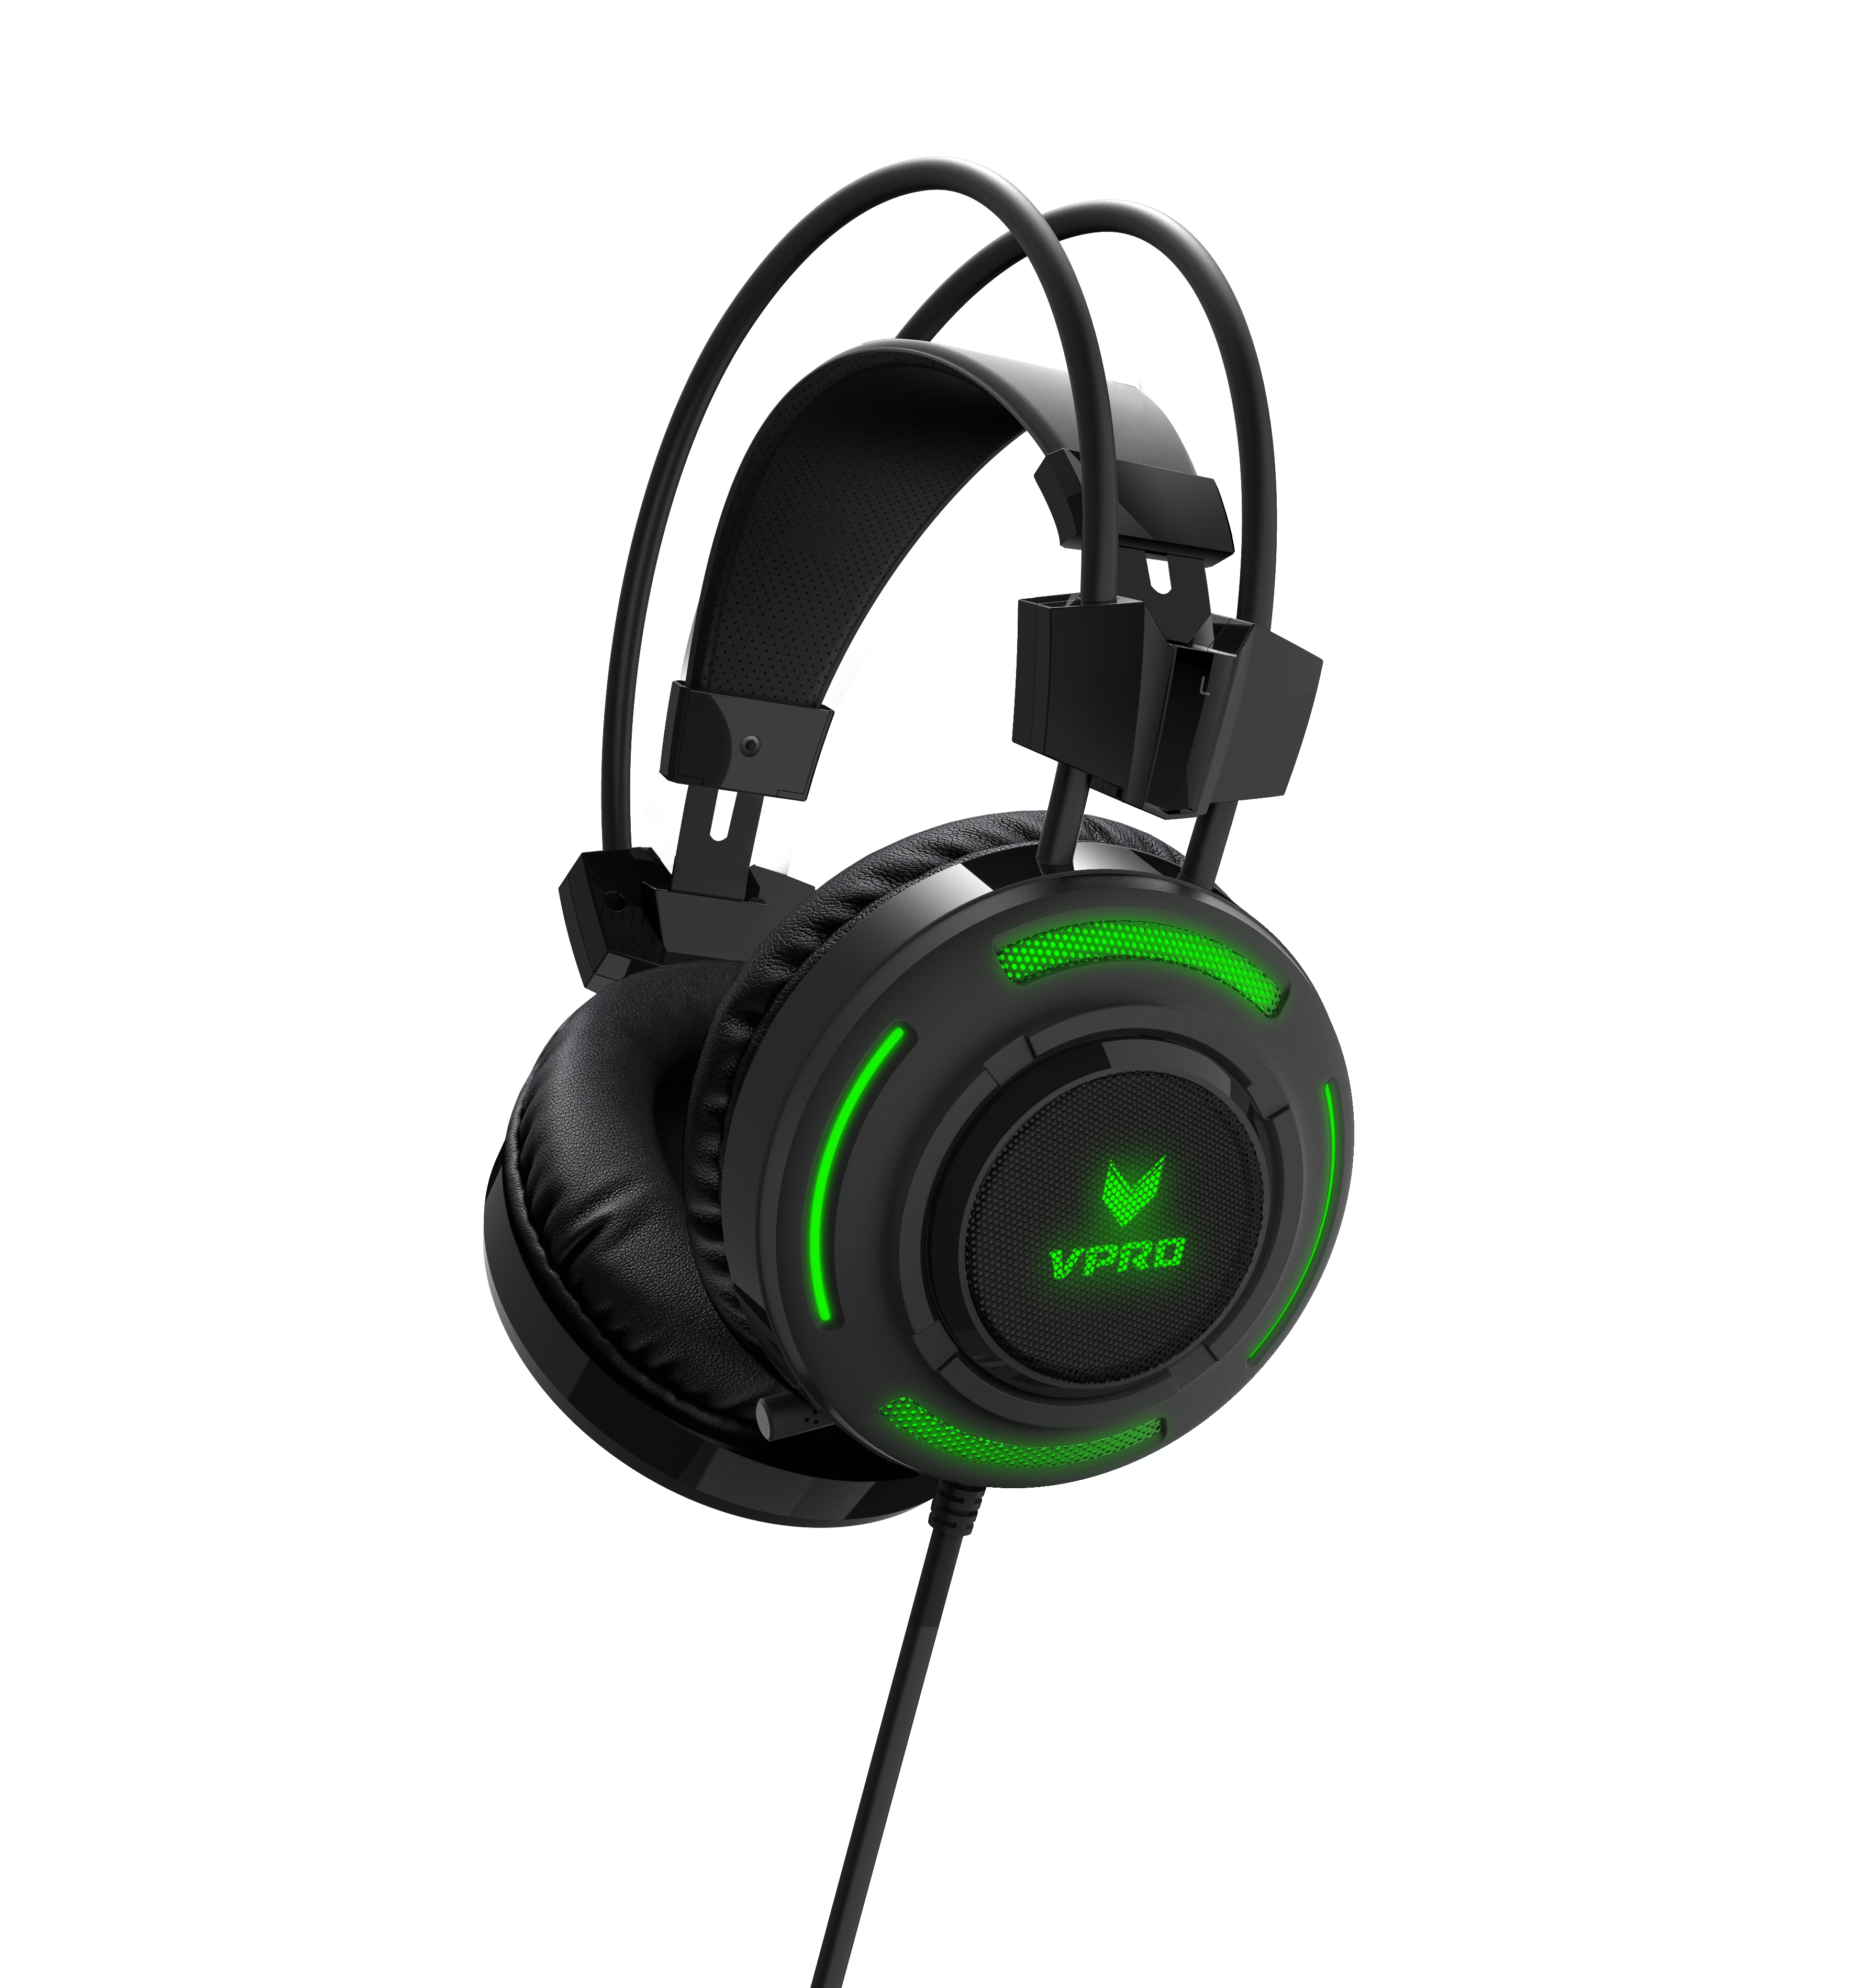 produceren Paard Arabisch Gaming Headsets Archives - Rapoo